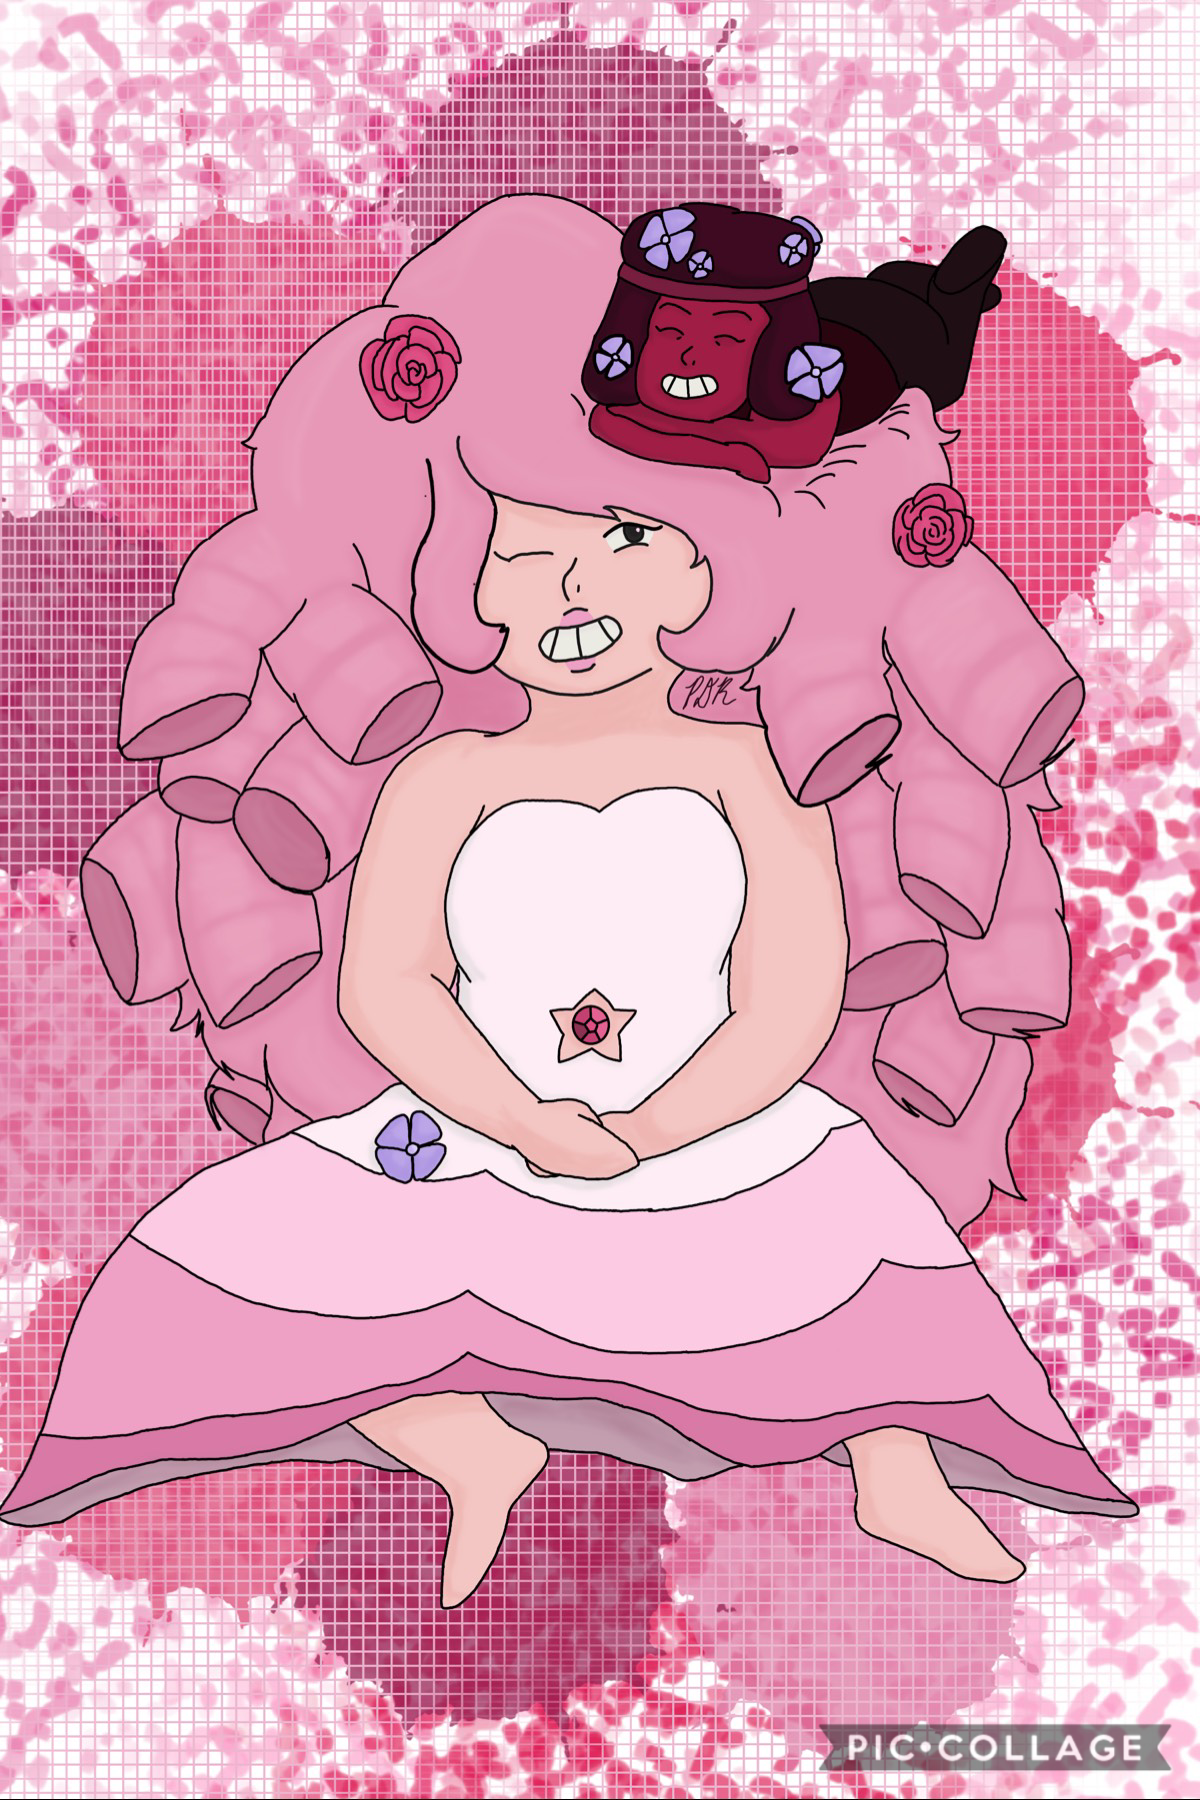 Ruby and Rose Quartz

I dedicated this drawing to my best friend. She’s been incredibly supportive and loving and I couldn’t ask for a better best friend 💕💕